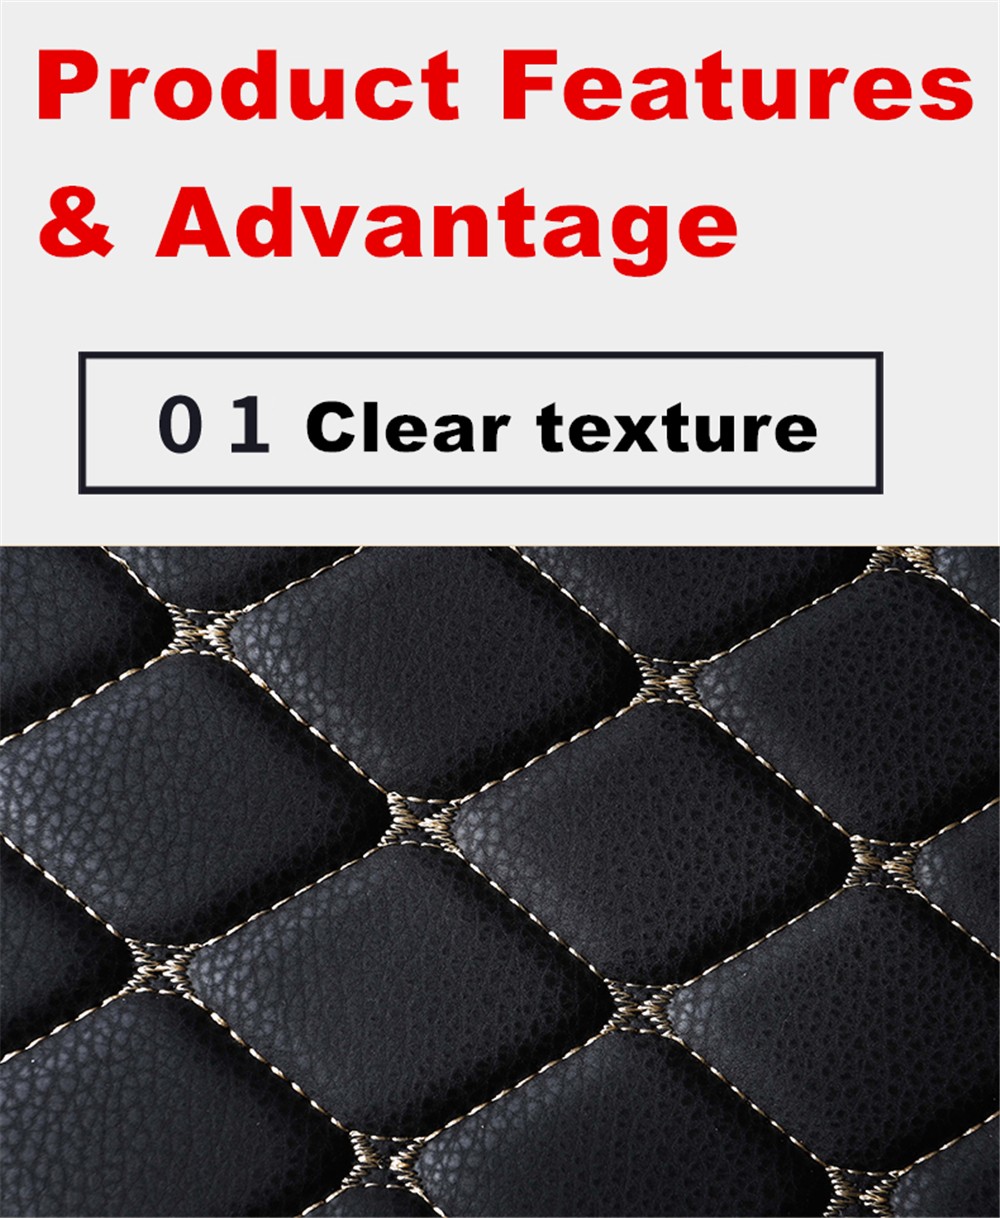 Cengair Car Trunk Mat All Weather Auto Tail Boot Luggage Pad Carpet High Side Cargo Liner Fit For Ford Escort 2015 2016 17-2021